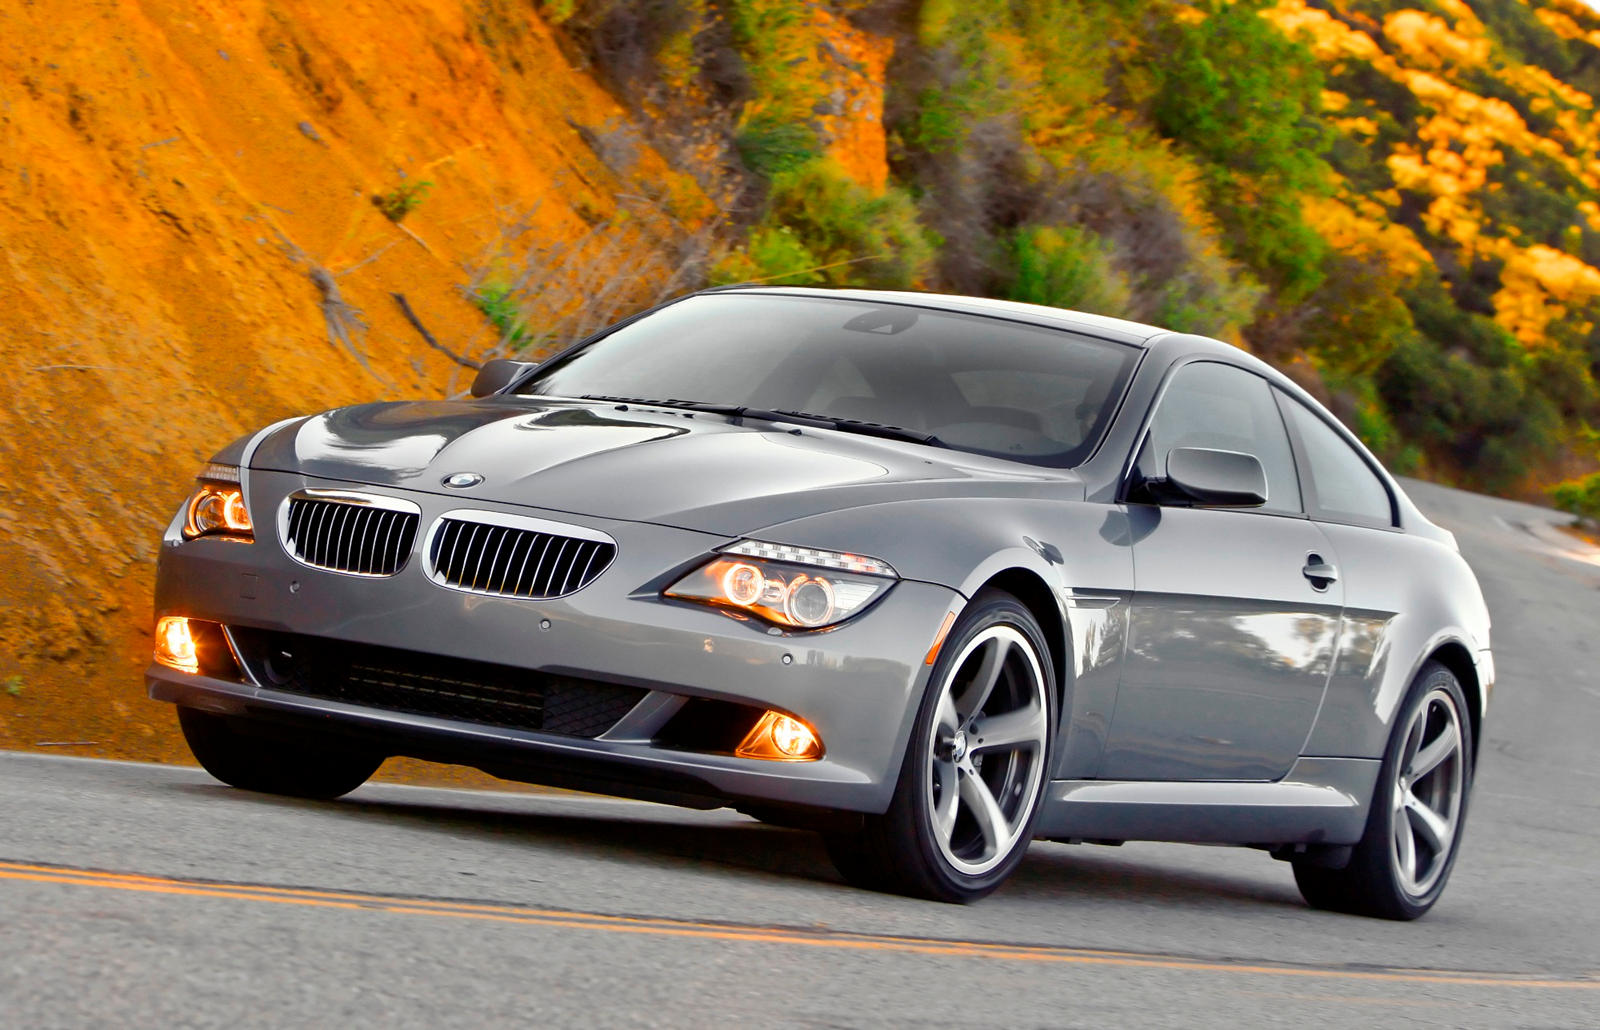 BMW 6 Series Coupe Generations: All Model Years